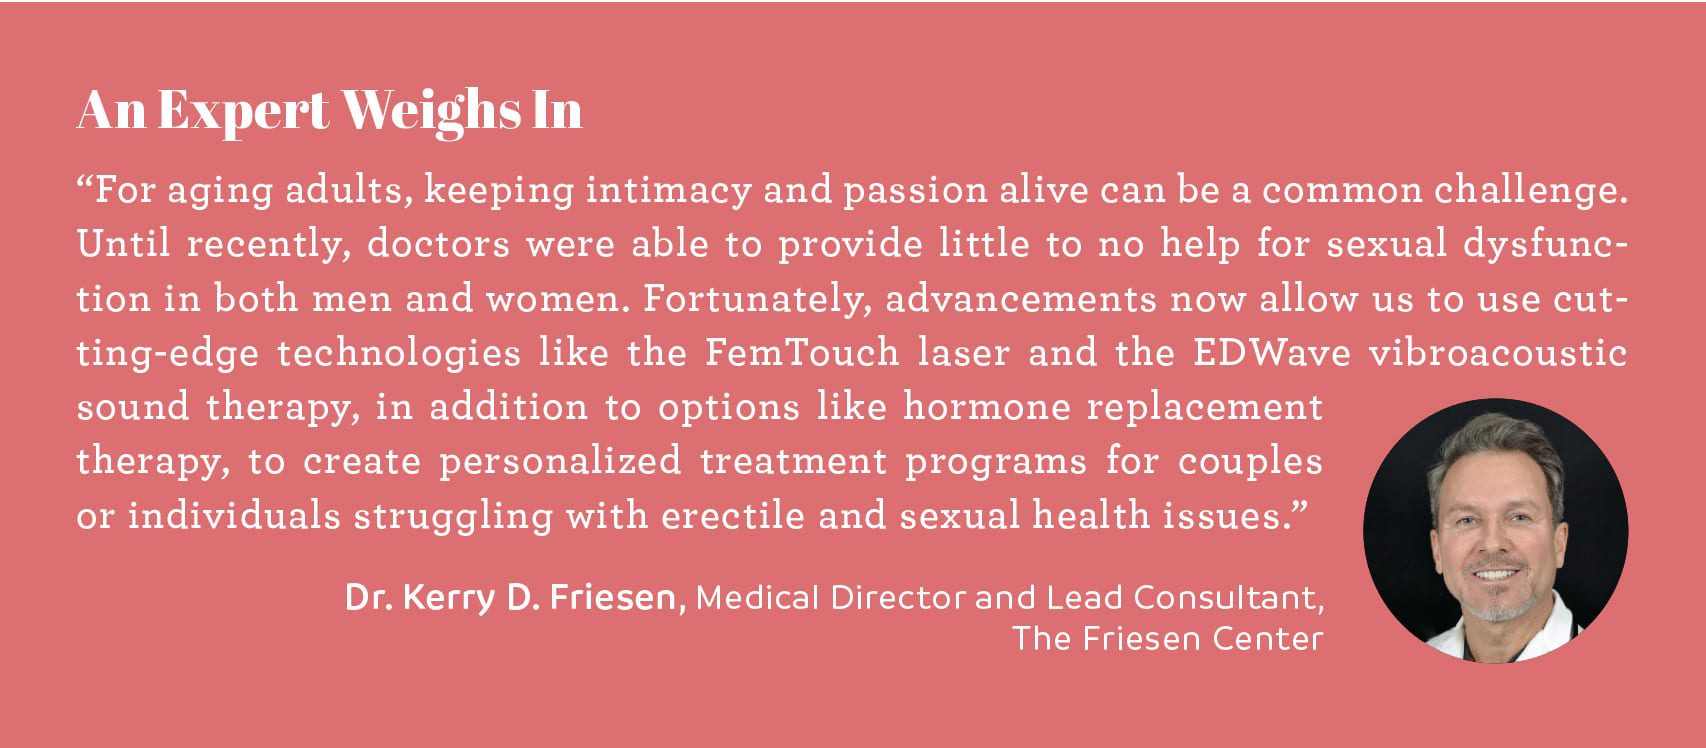 Expert opinion chattanooga doctor kerry d friesen medical director and lead consultant the friesen center